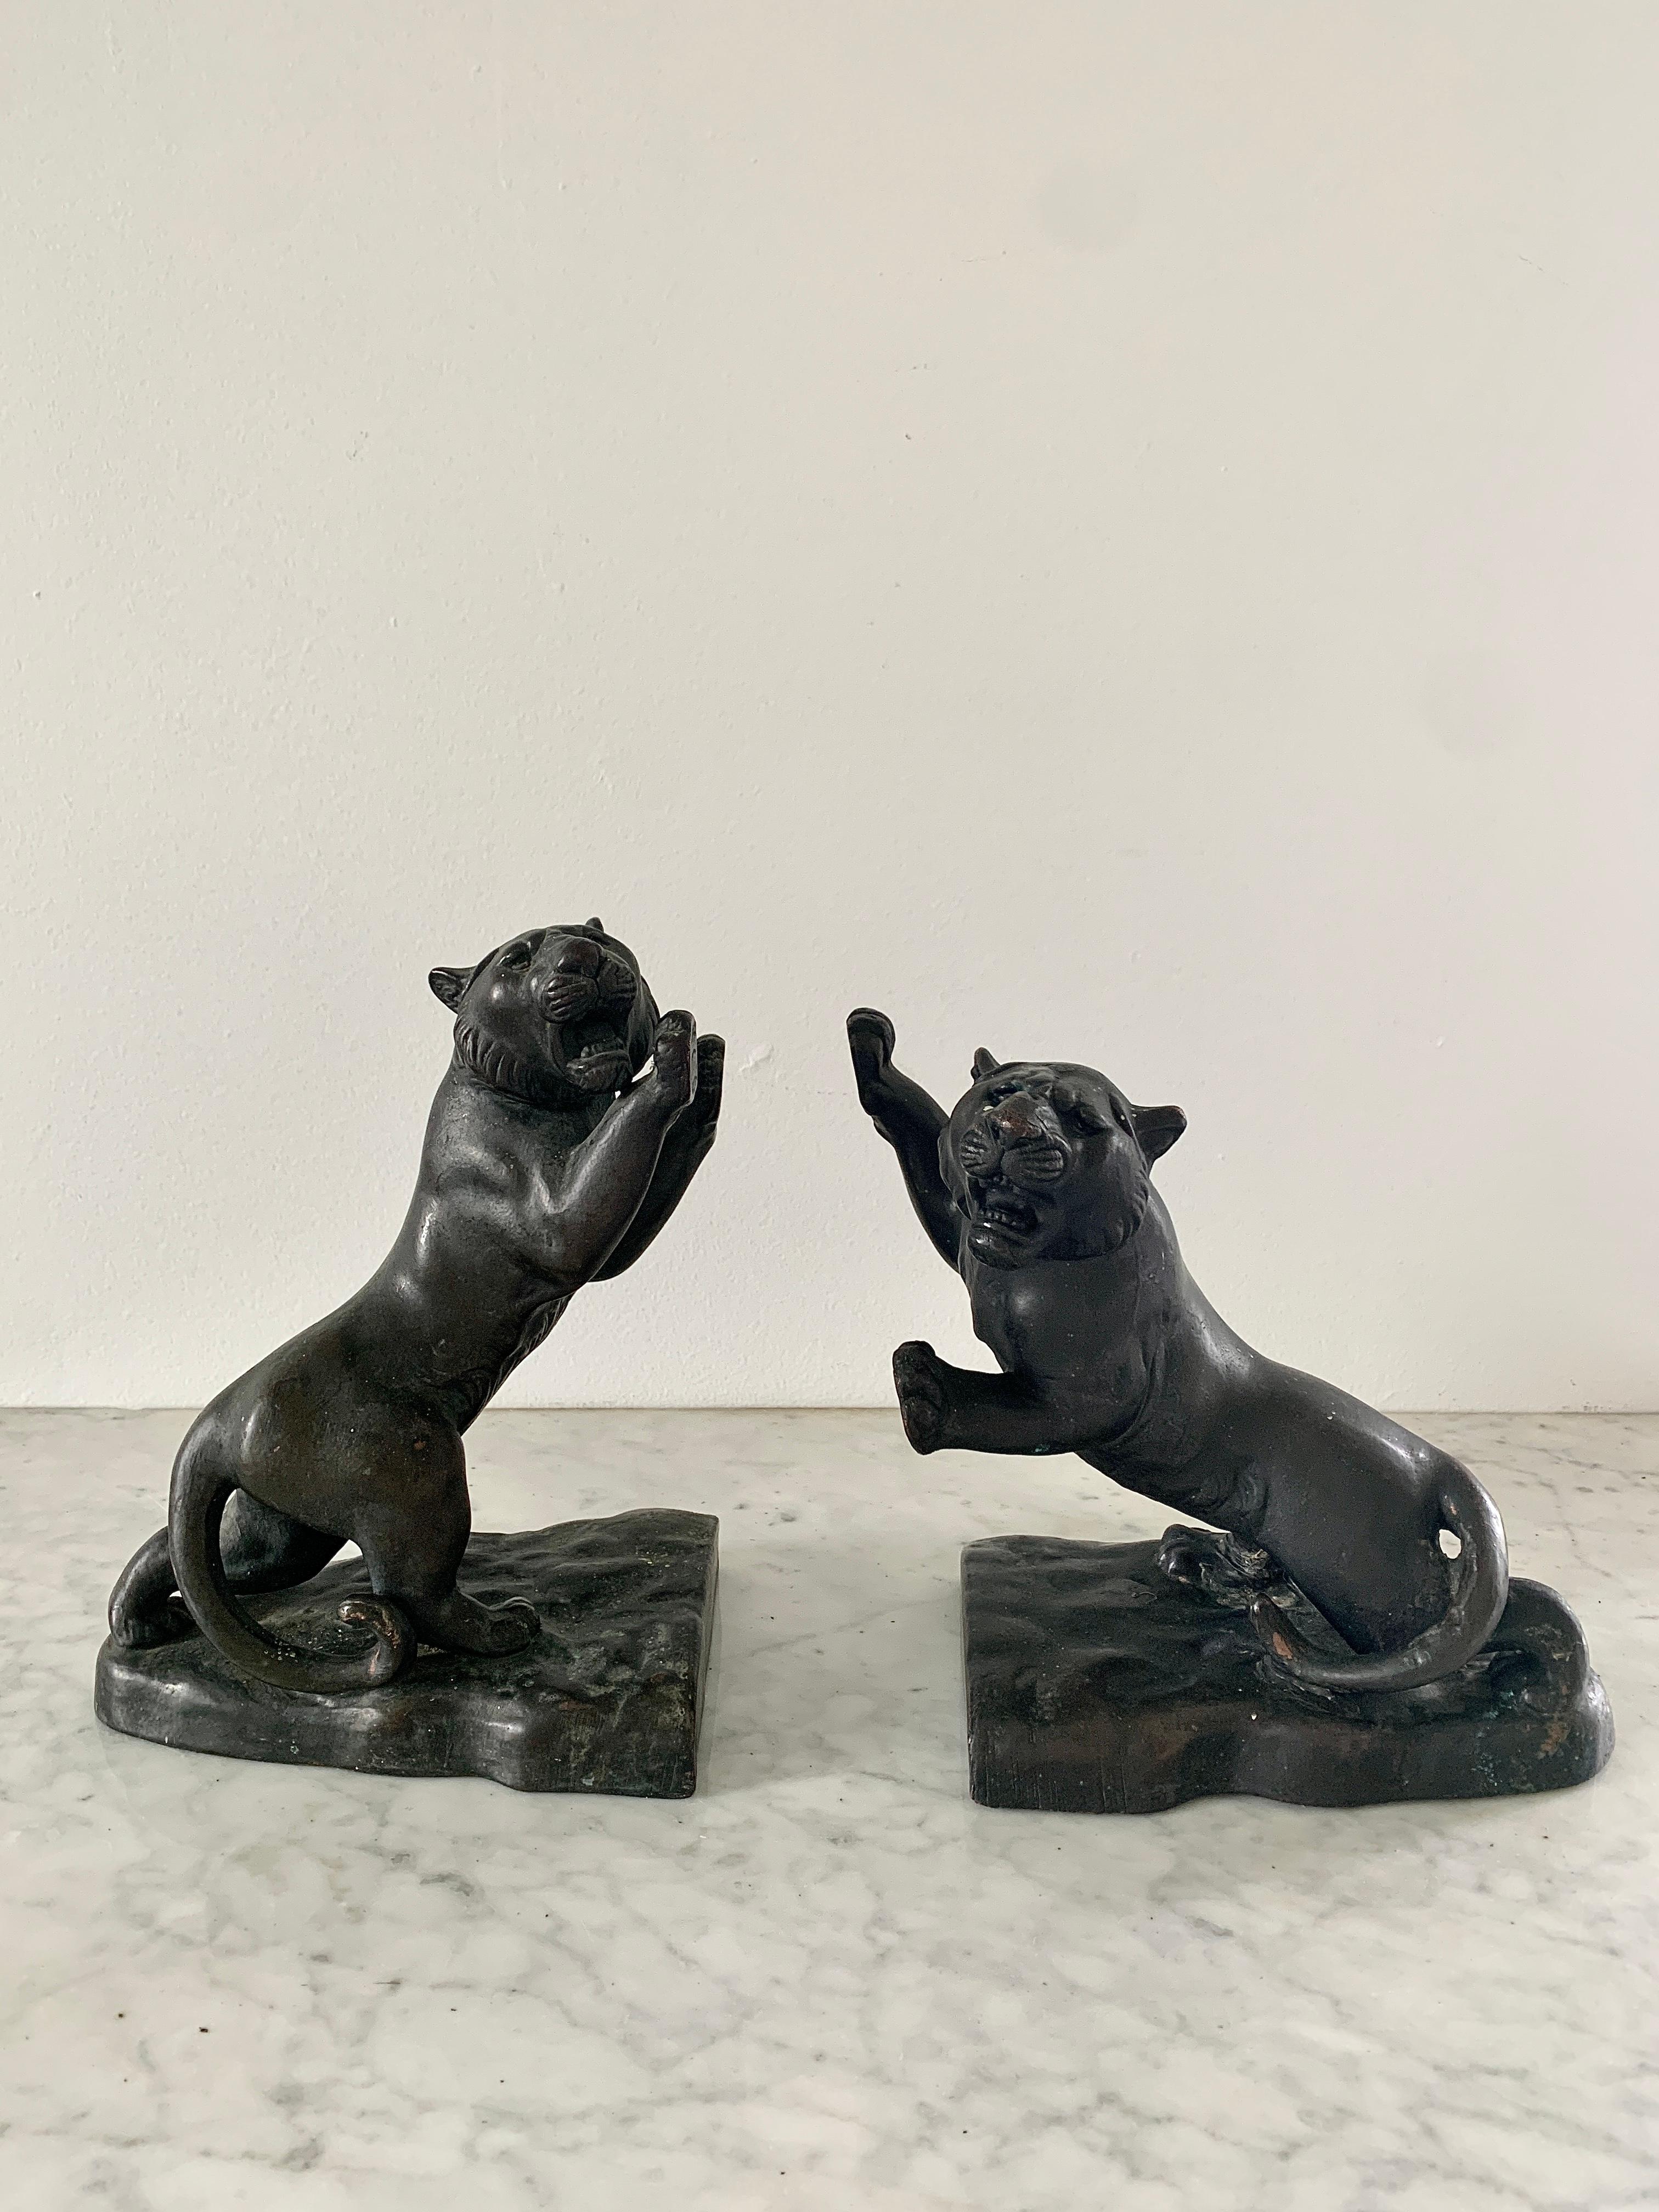 A gorgeous pair of Neoclassical or Grand Tour style bronze bookends in the form of roaring tigers. 

USA, Late 19th century

Measures: 7.75